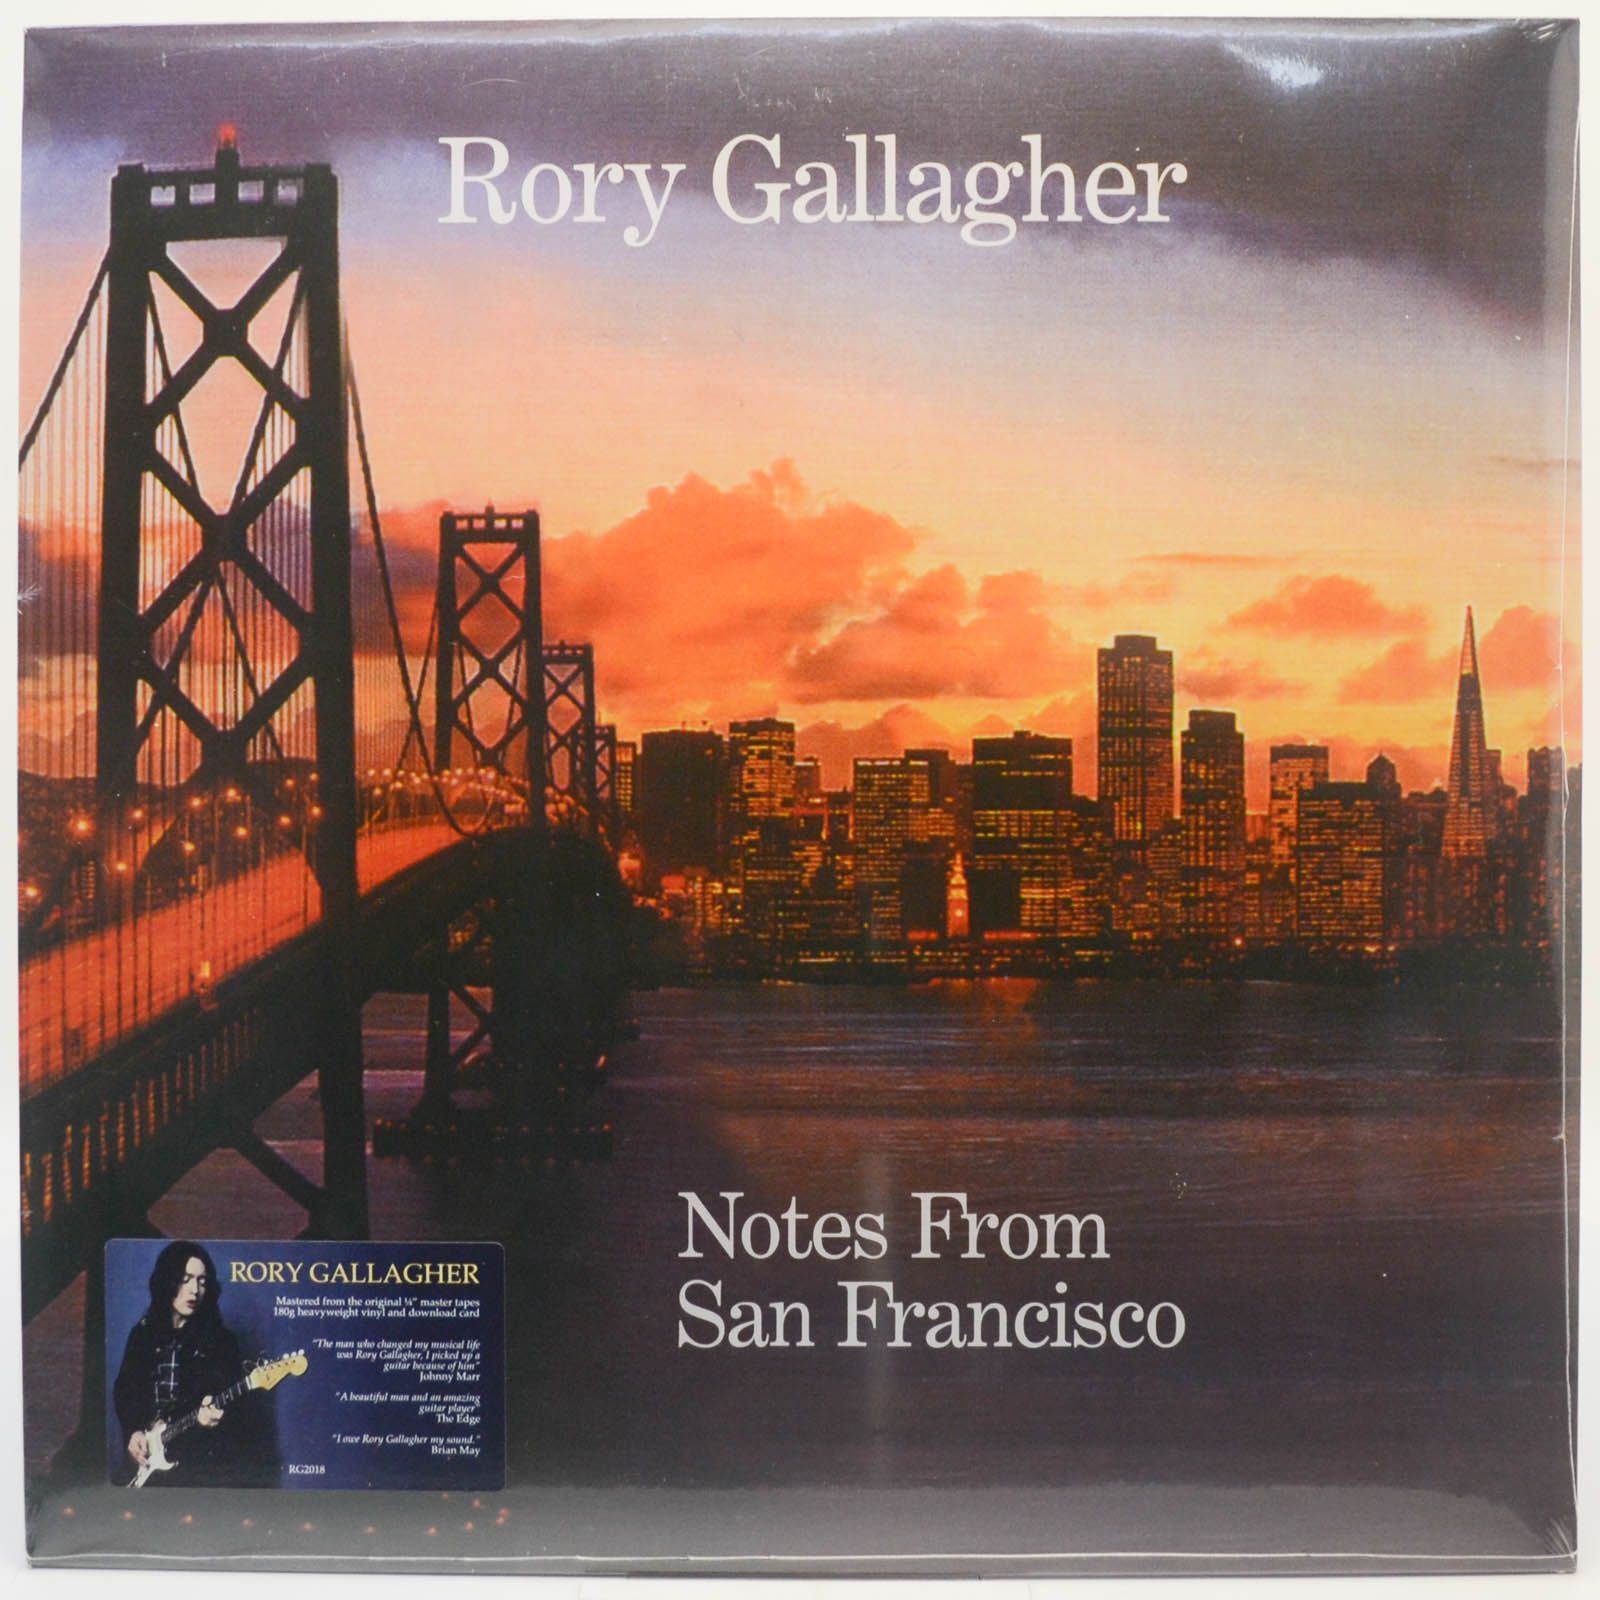 Rory Gallagher — Notes From San Francisco, 2011